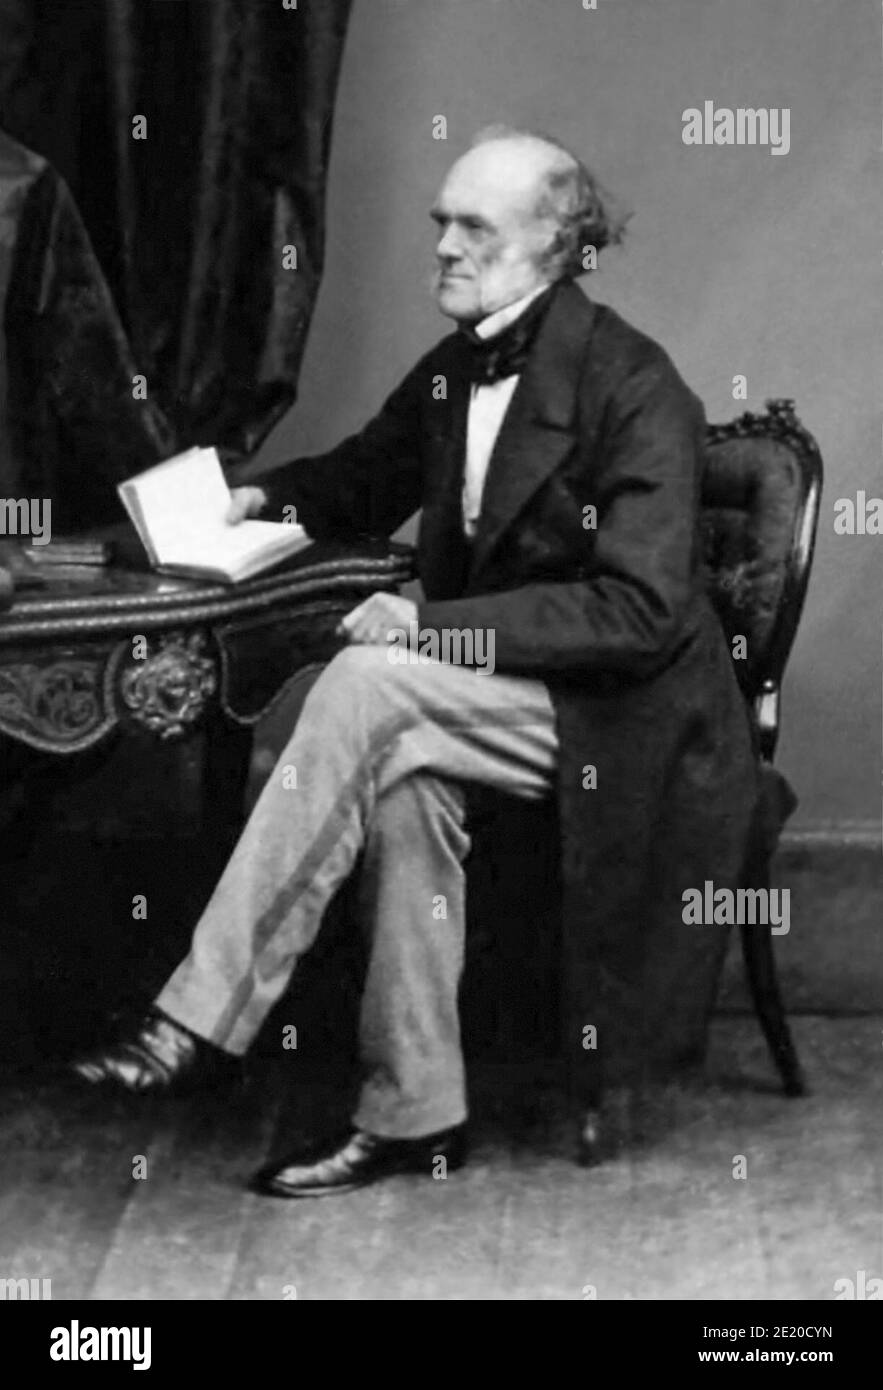 Sir Charles Lyell, 1st Baronet, FRS (1797-1875) was a British lawyer and the leading geologist of his day.  (Photo c1860) Stock Photo